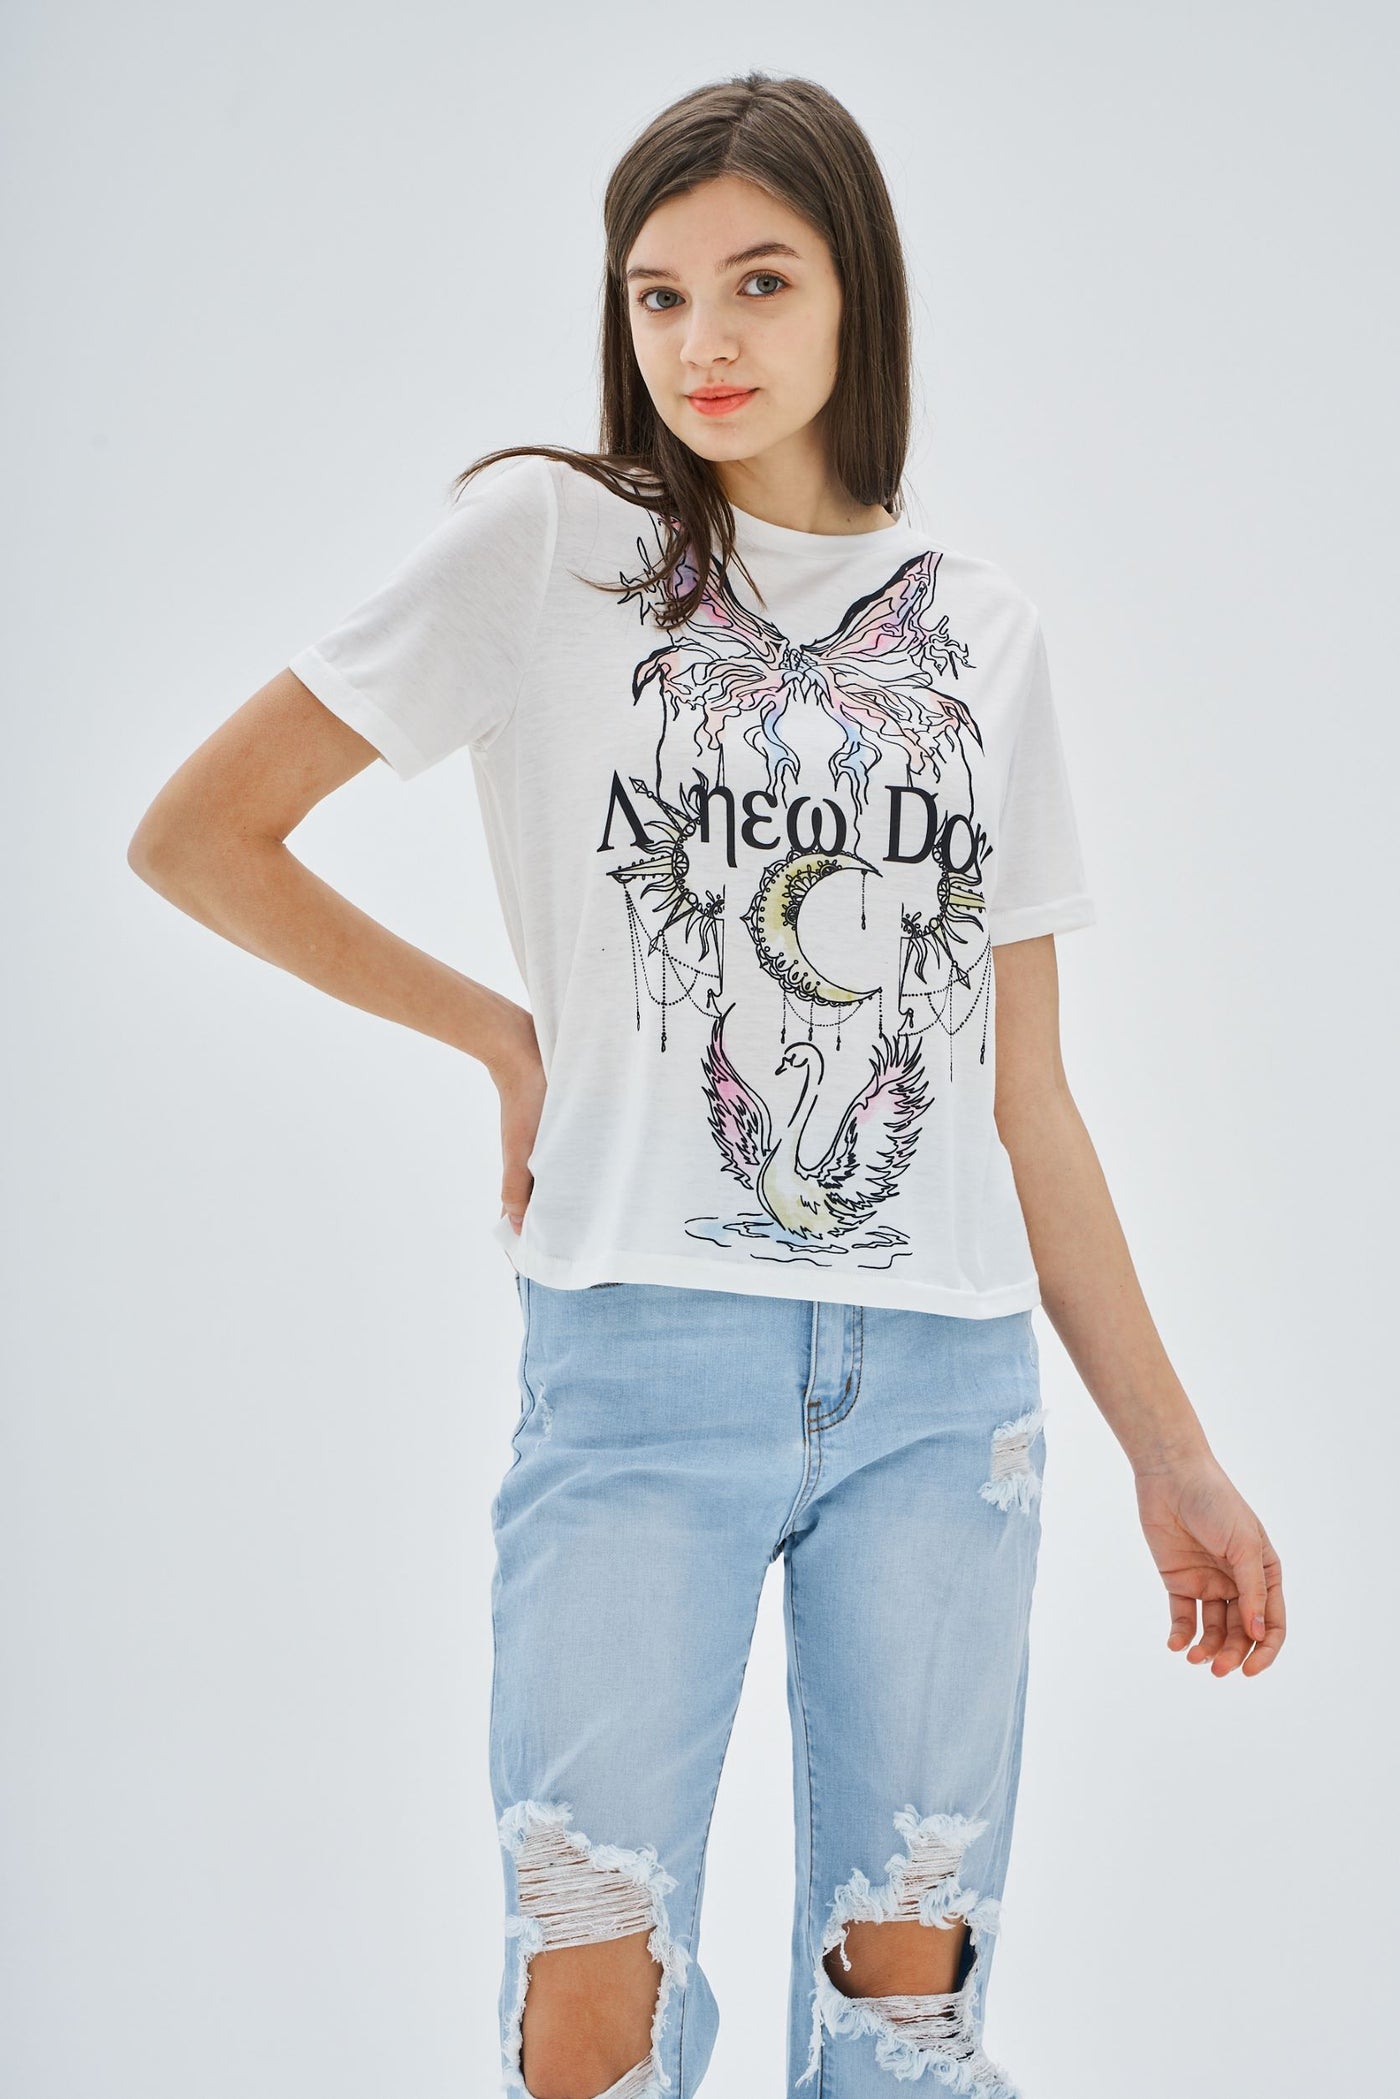 A NEW DAY BUTTERFLY MOON PRINT T SHIRT